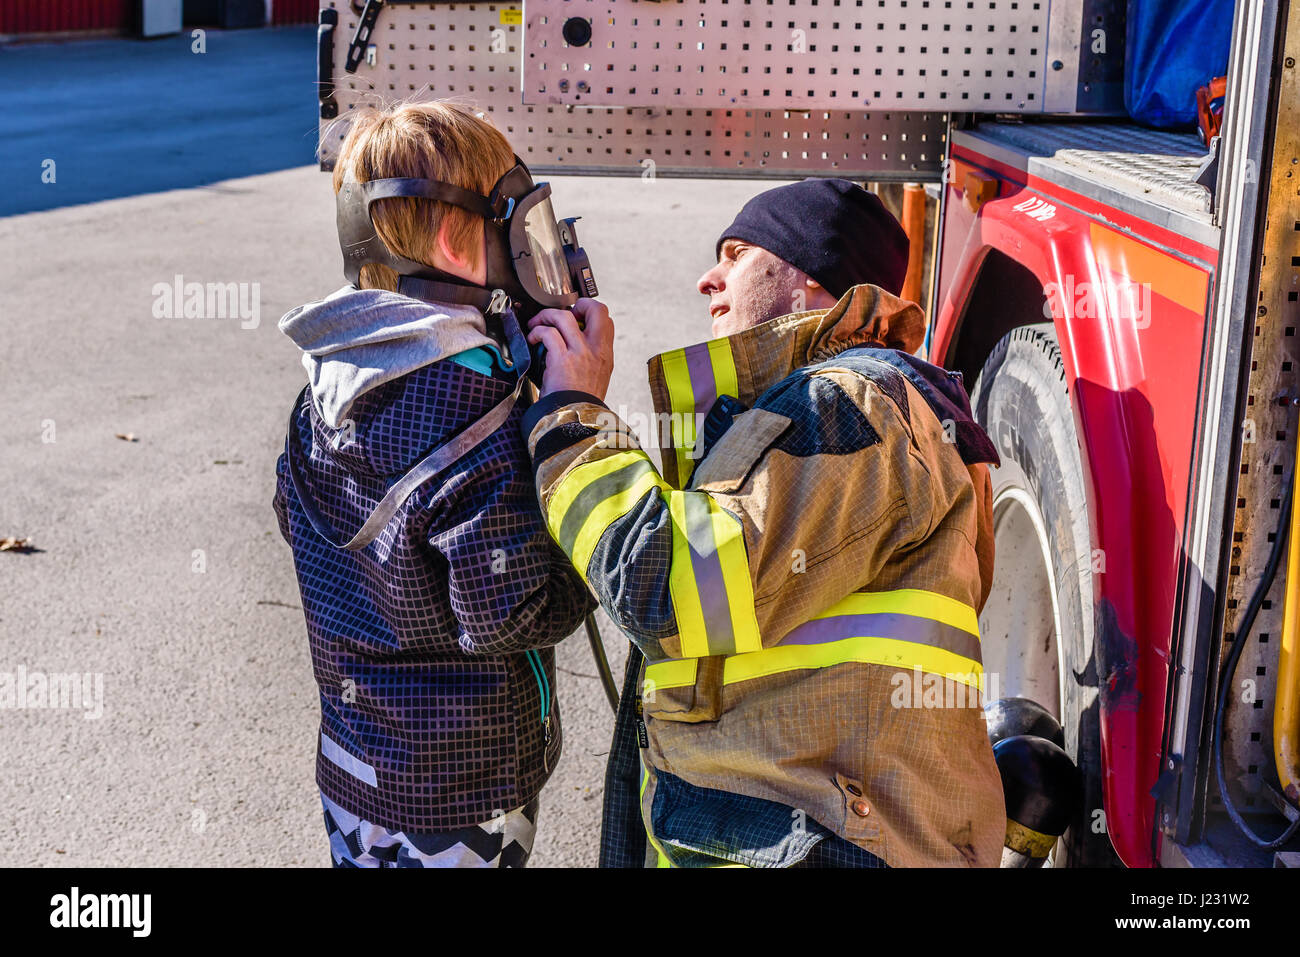 Brakne Hoby, Sweden - April 22, 2017: Documentary of public fire truck presentation. Firefighter helping young boy try a self-contained breathing appa Stock Photo